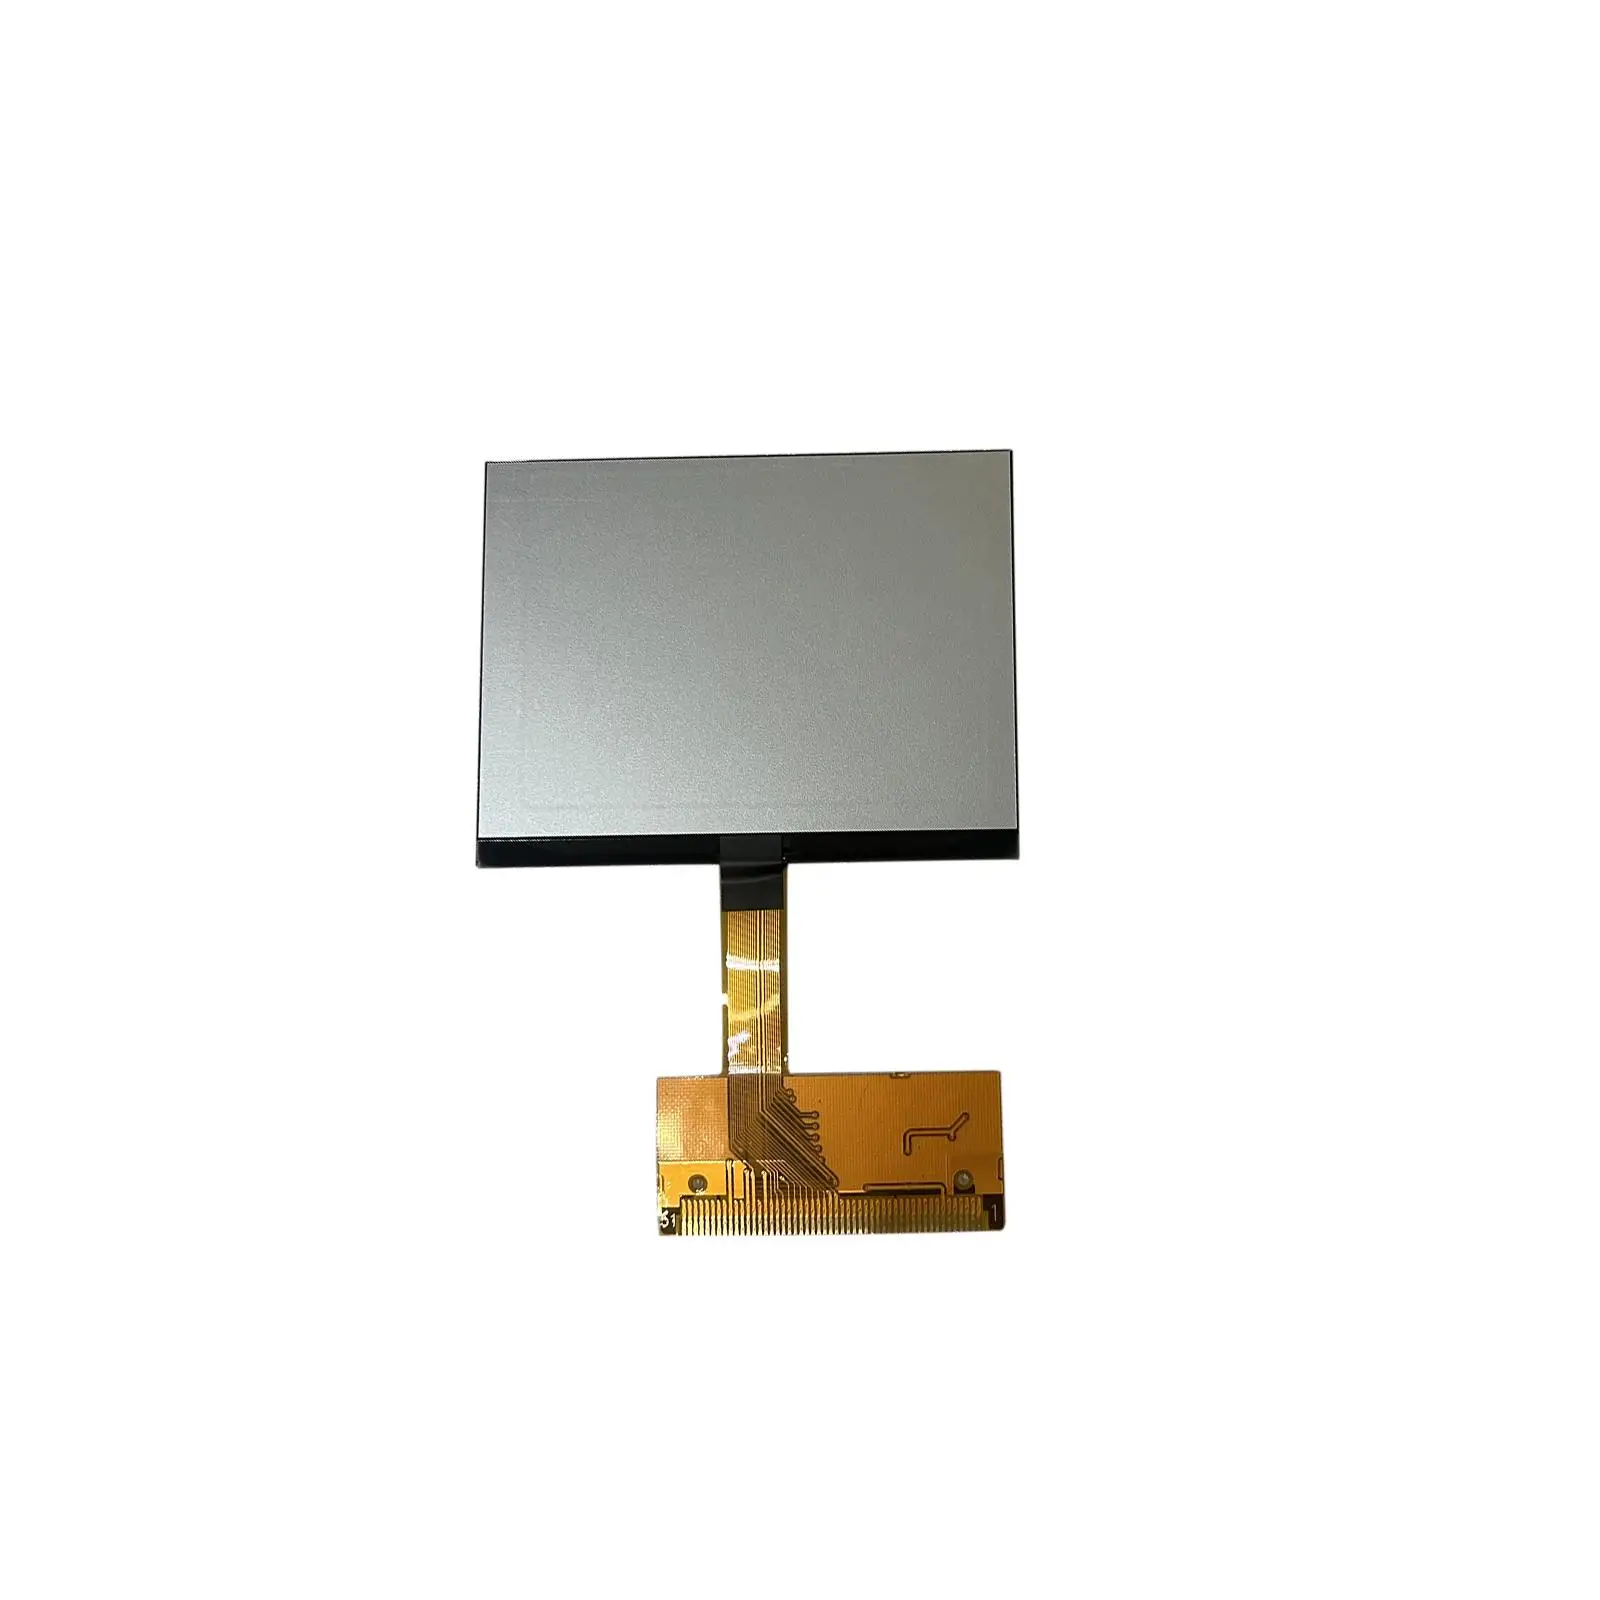 LCD Display Replacement Professional for Audi a3 A4 7.5cmx6cm